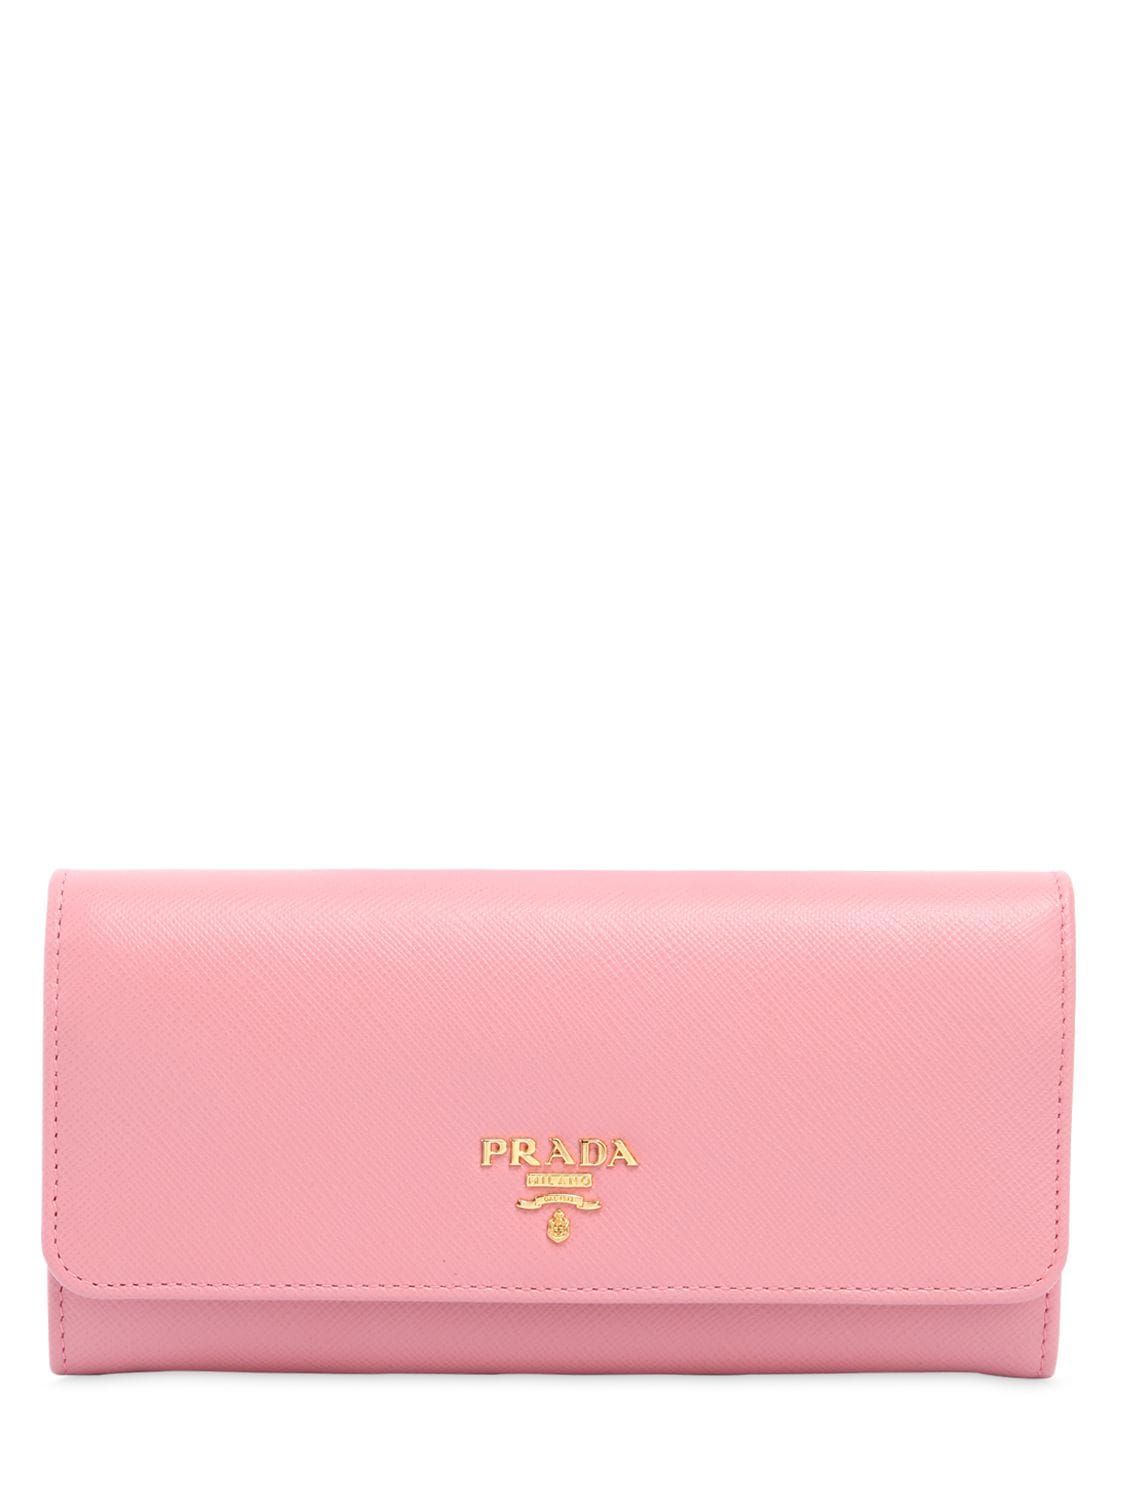 Prada Saffiano Leather Continental Wallet In Pink